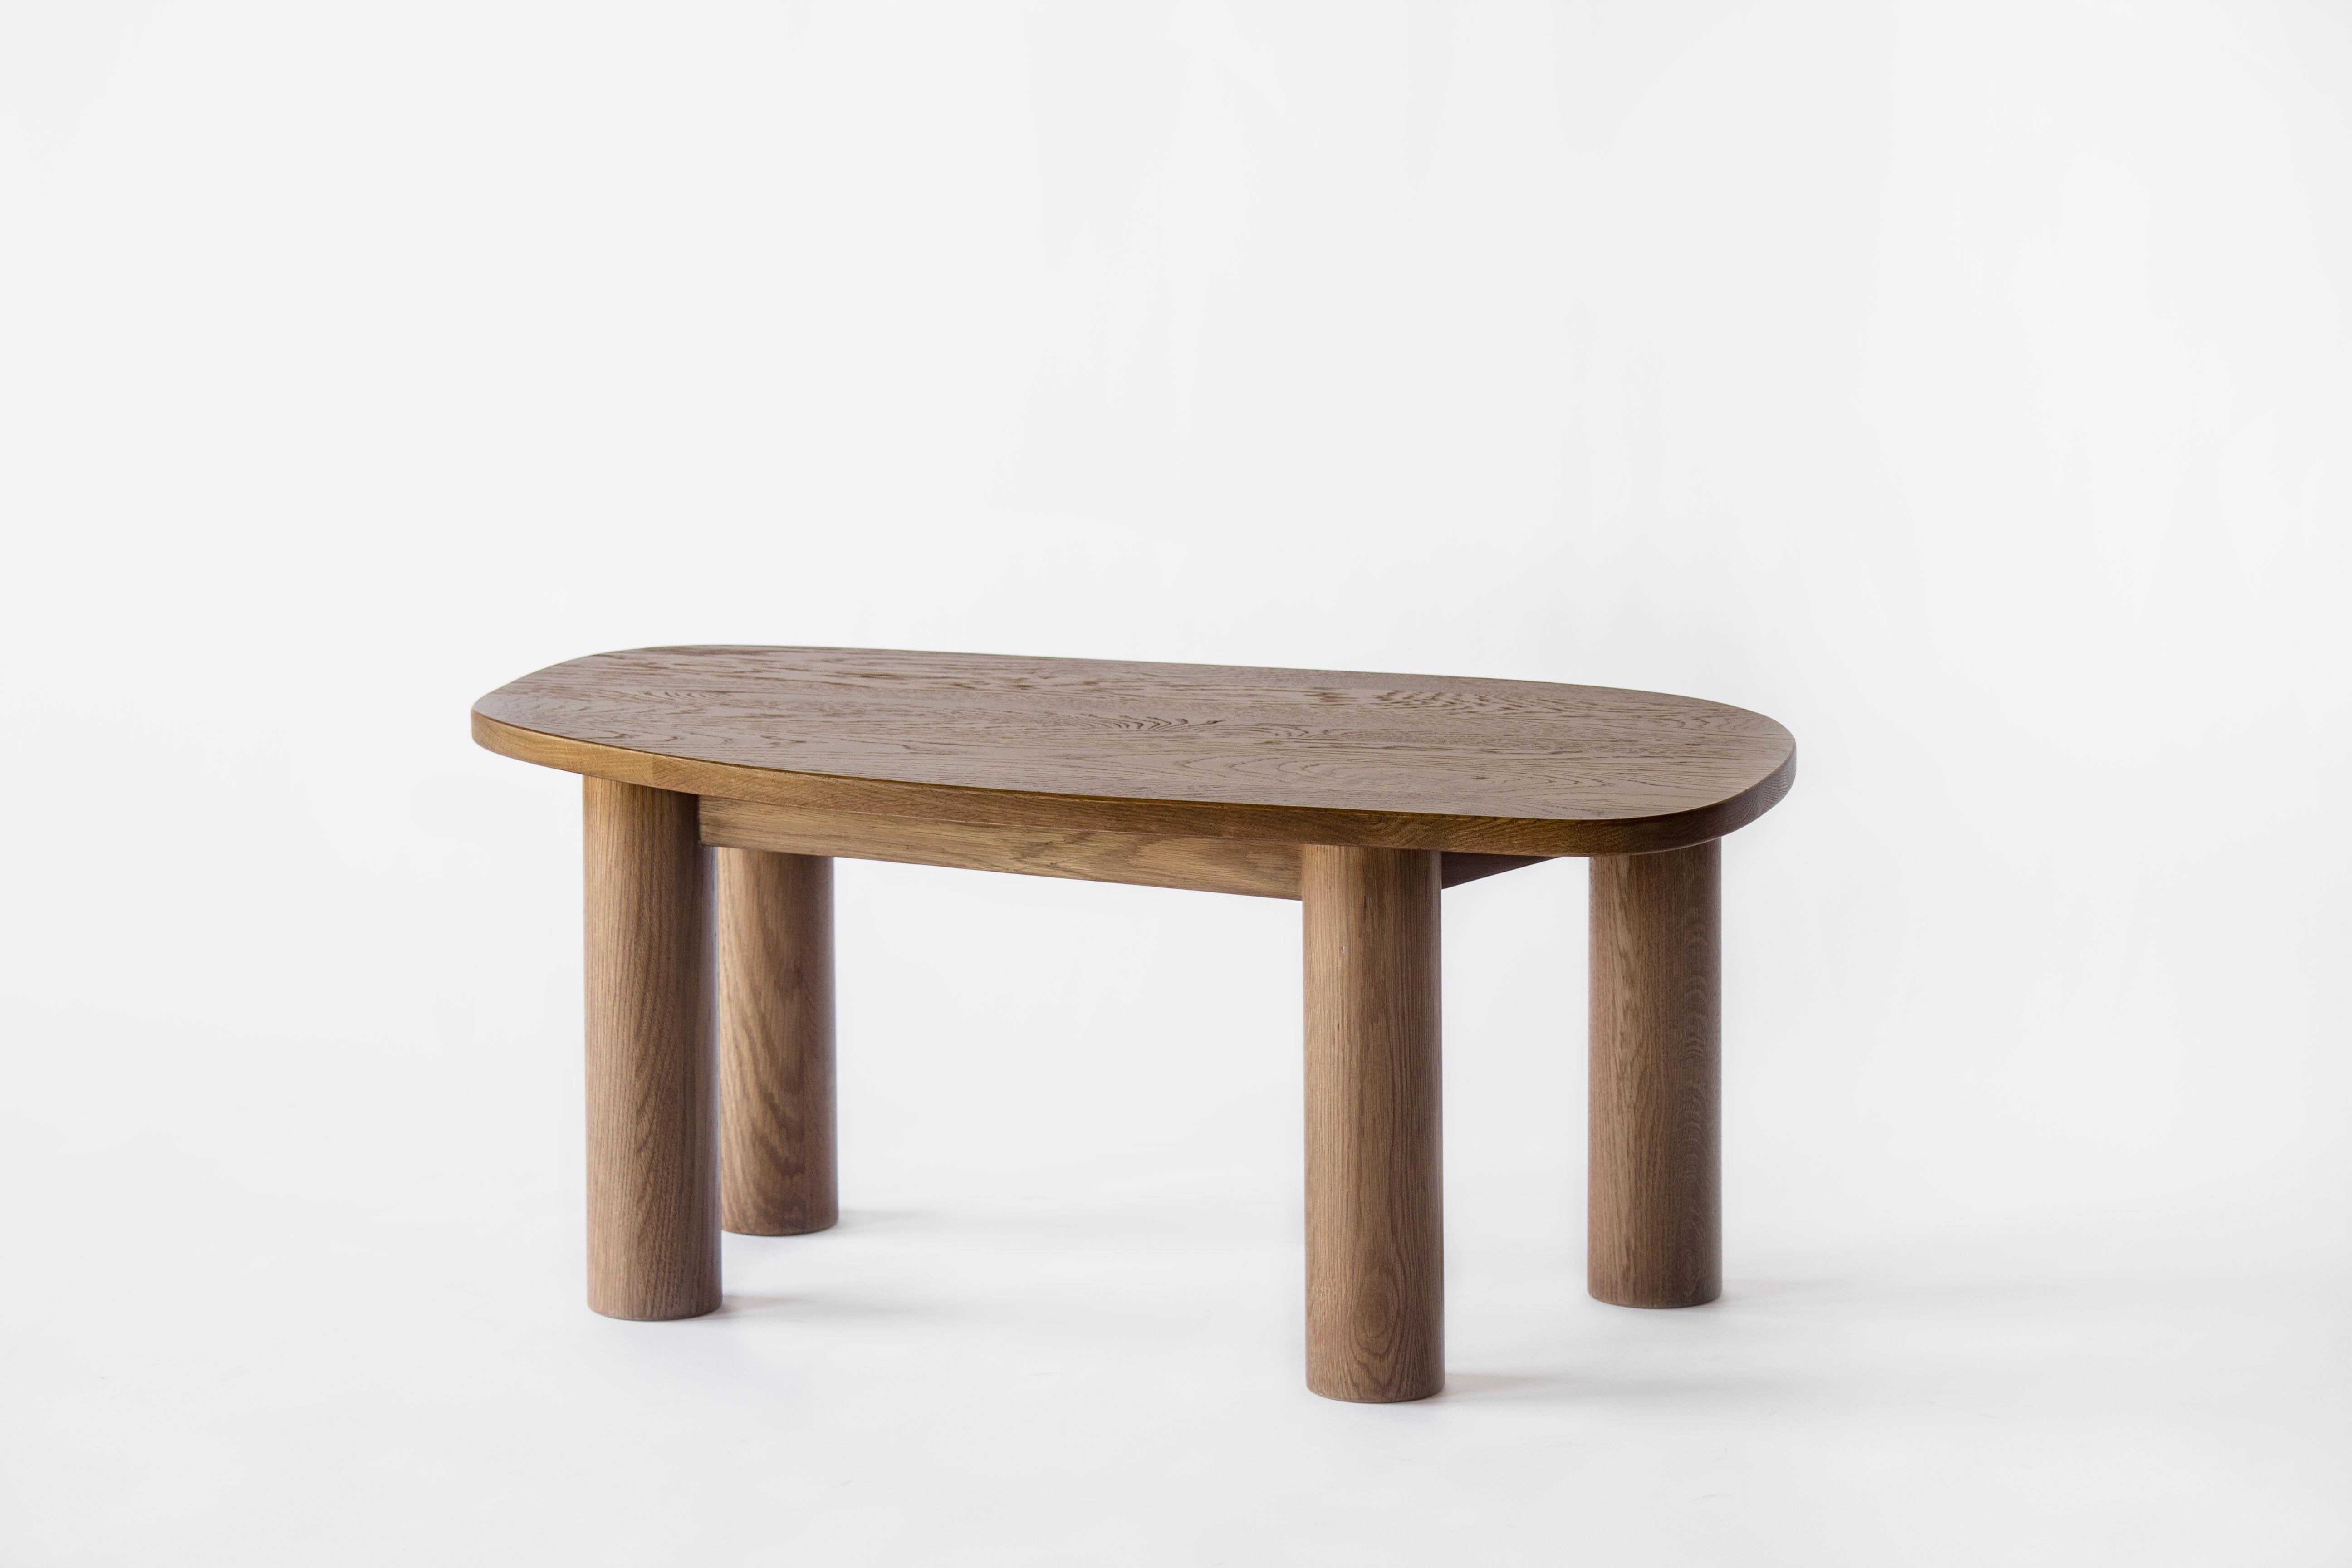 Sun at Six is a contemporary furniture design studio that works with traditional Chinese joinery masters to handcraft our pieces using traditional joinery. Our Classic coffee table simple, versatile and functional. Tenna oil is hand rubbed. Measure: